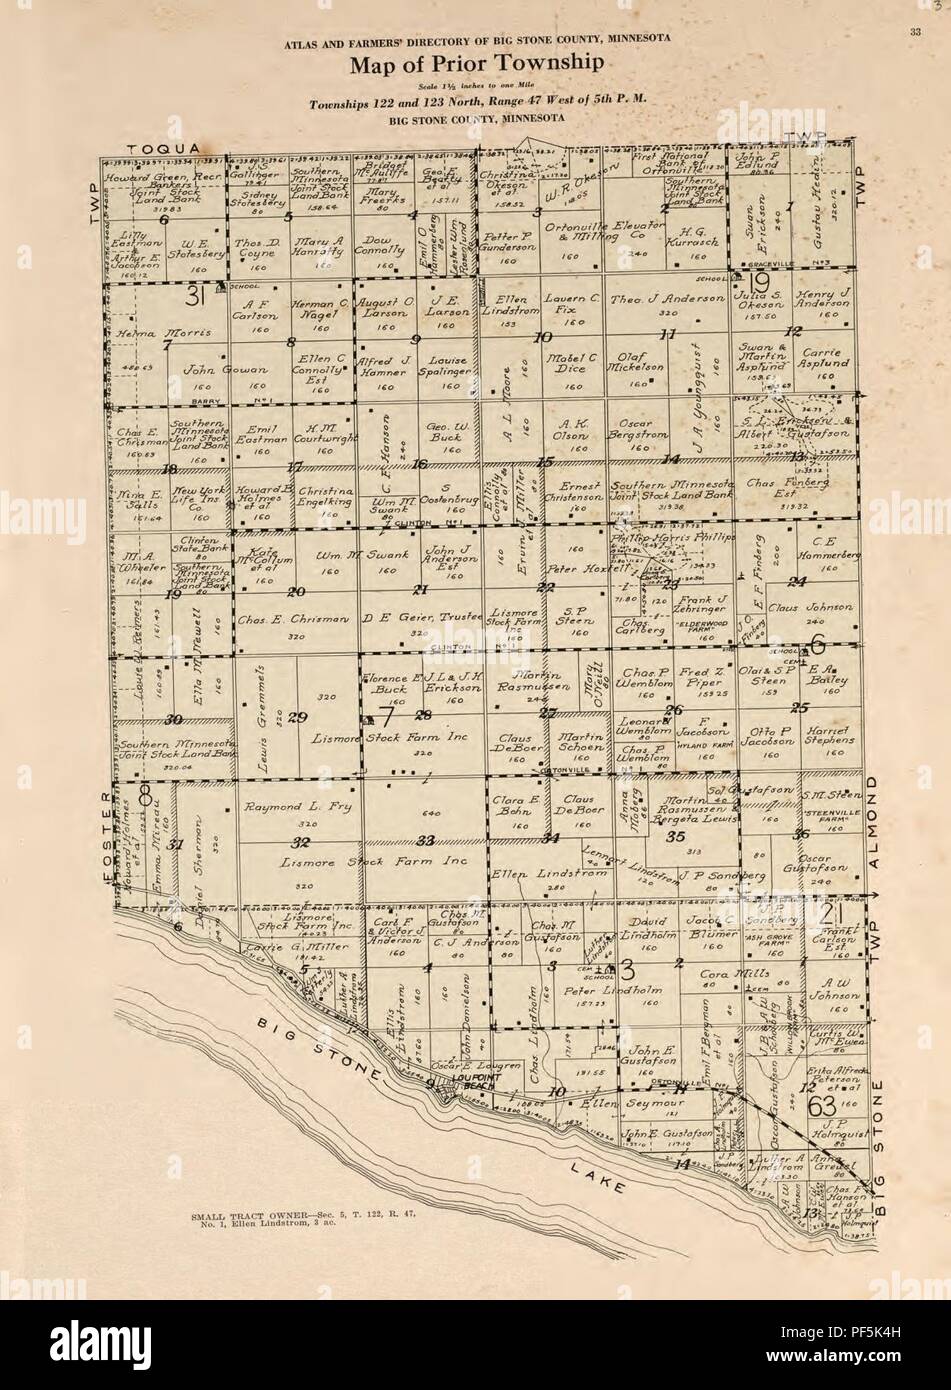 Atlas and farmers' directory of Big Stone County, Minnesota - containing plats of all townships with owners' names, an outline map of the county and a state map of Minnesota, compiled from latest Stock Photo